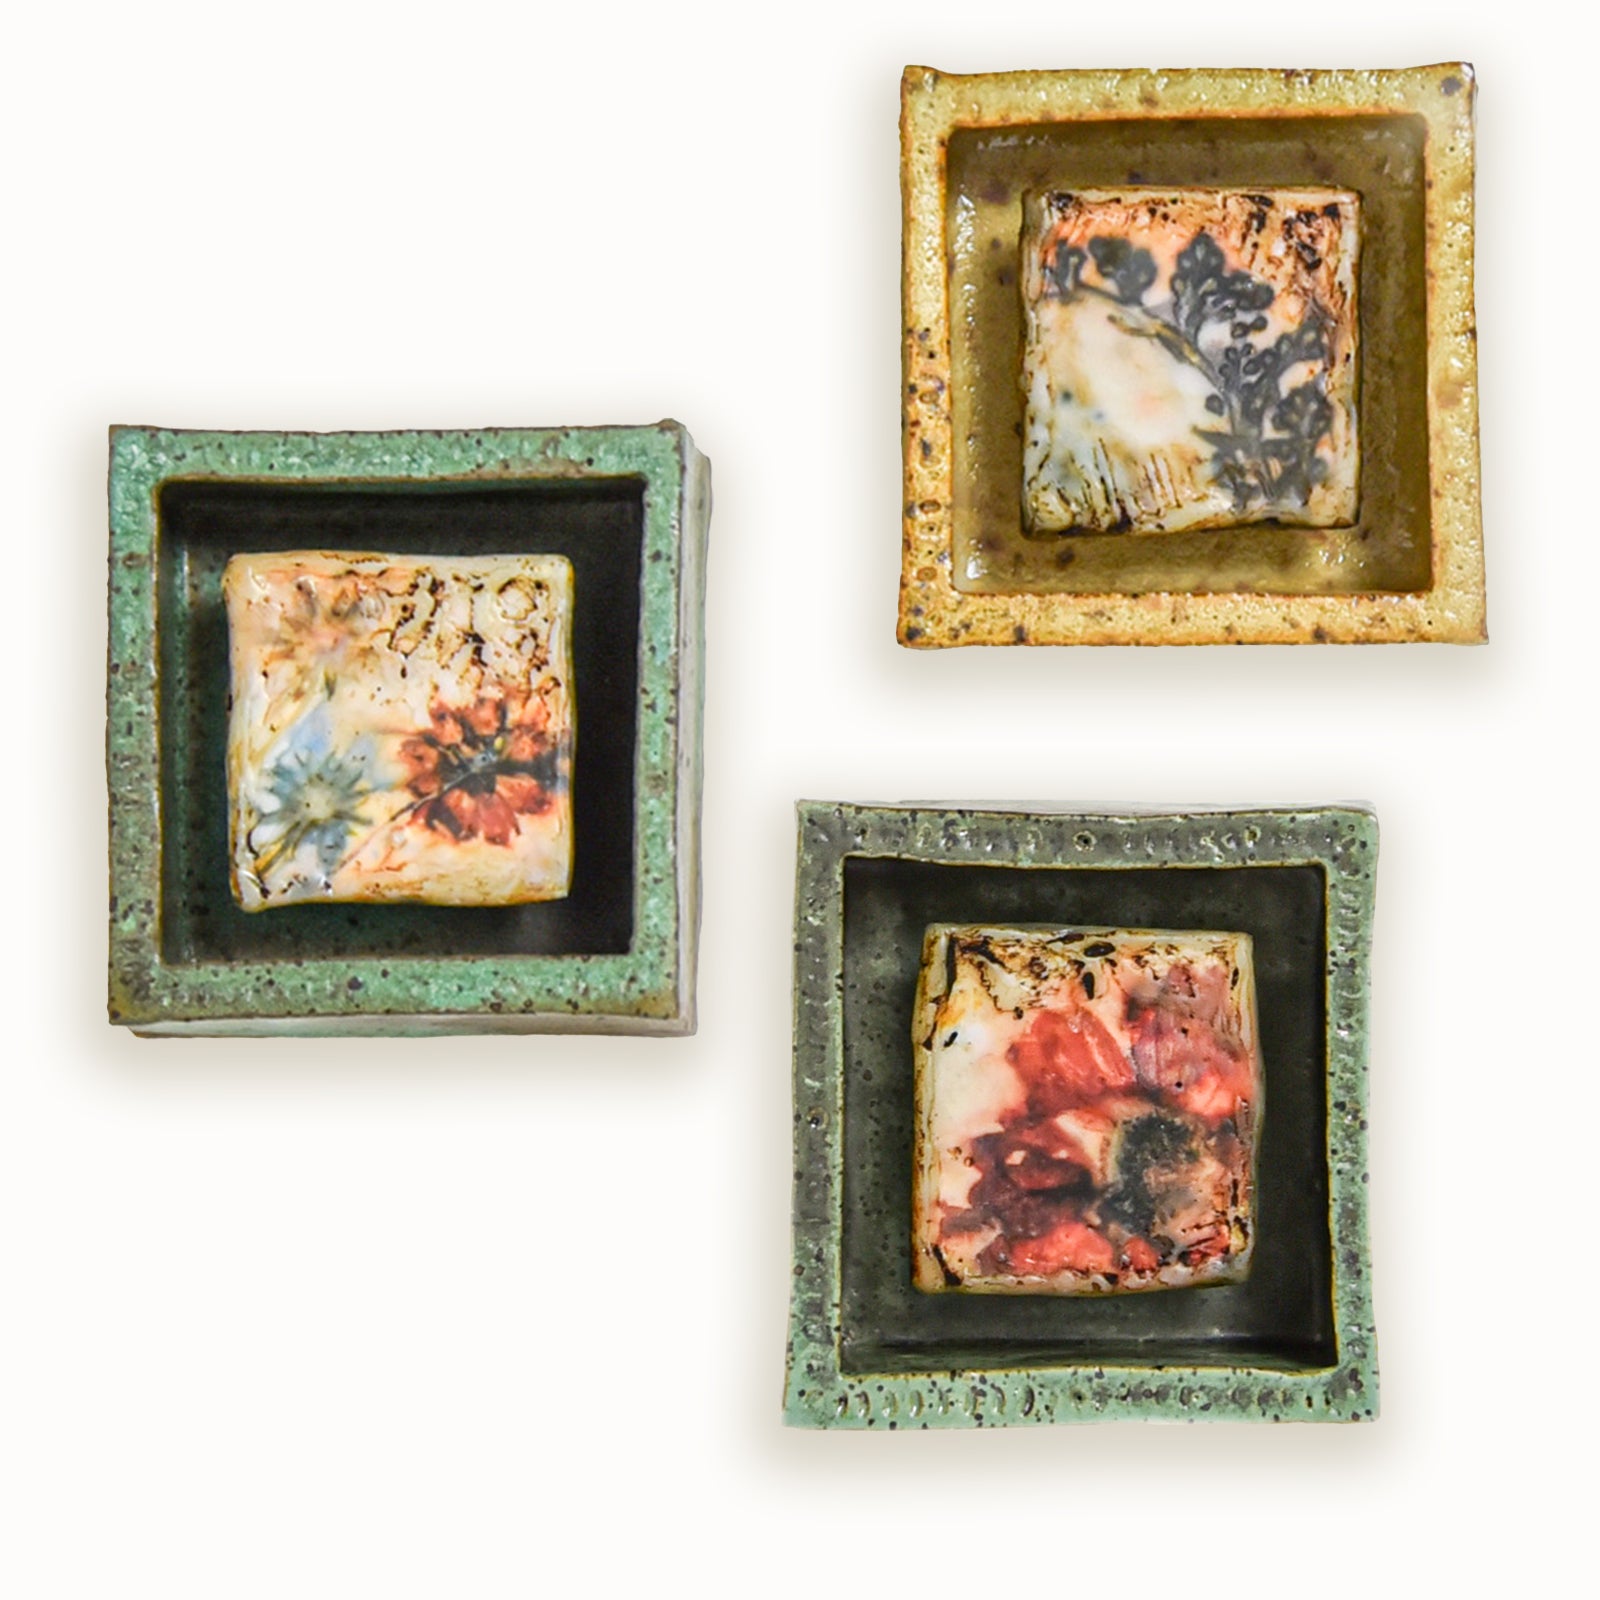 Memory Keepers (set of 3)